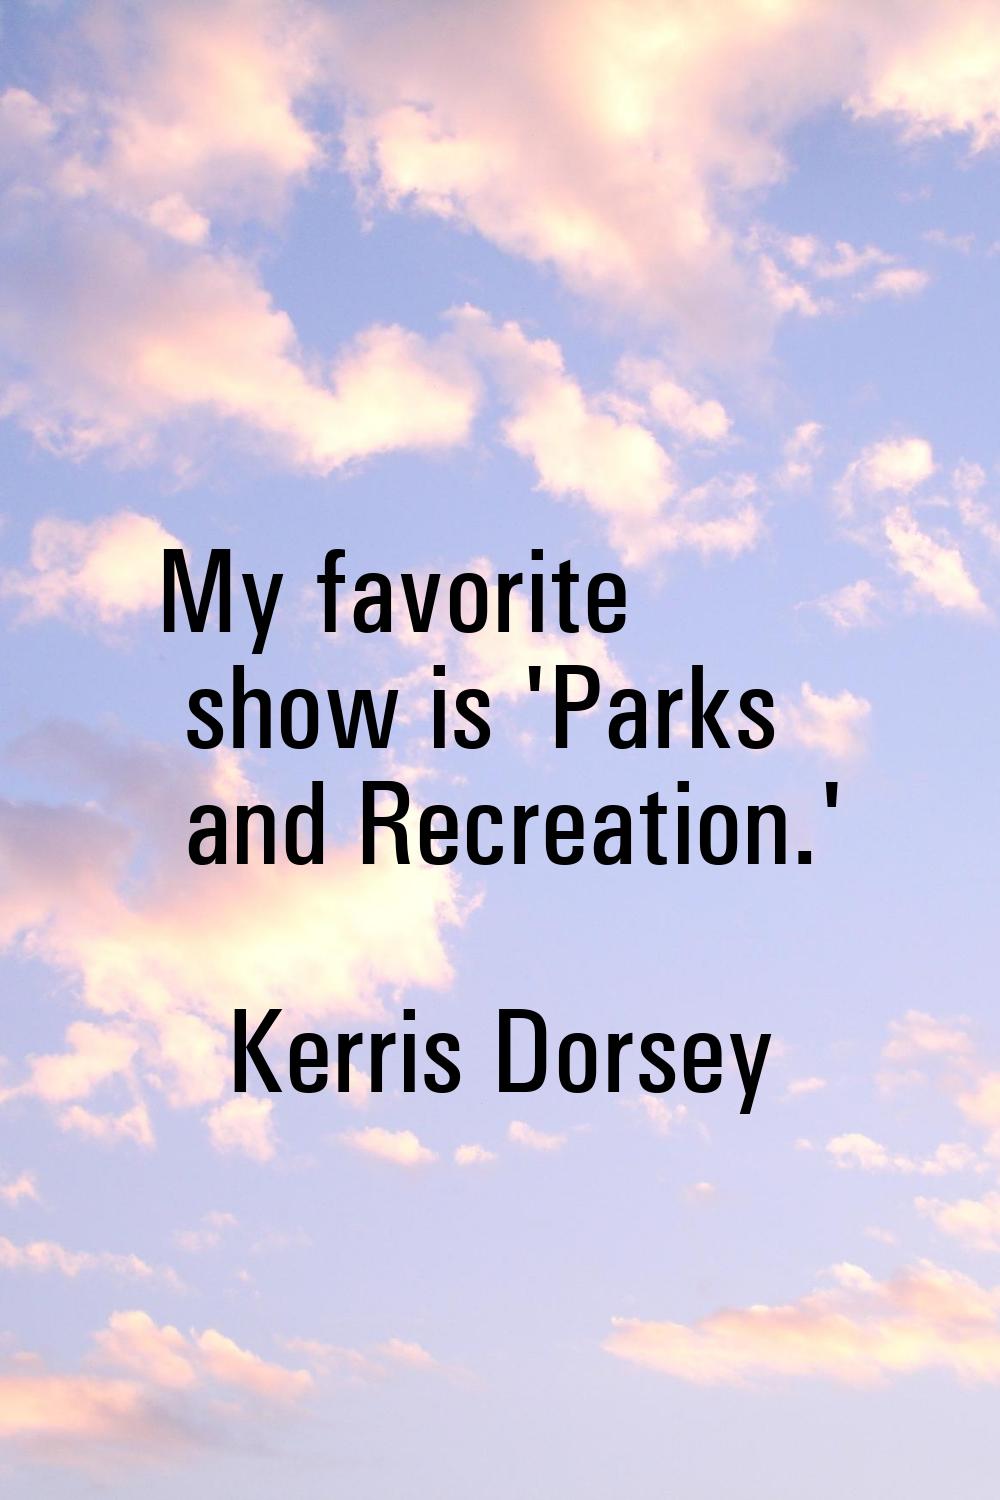 My favorite show is 'Parks and Recreation.'